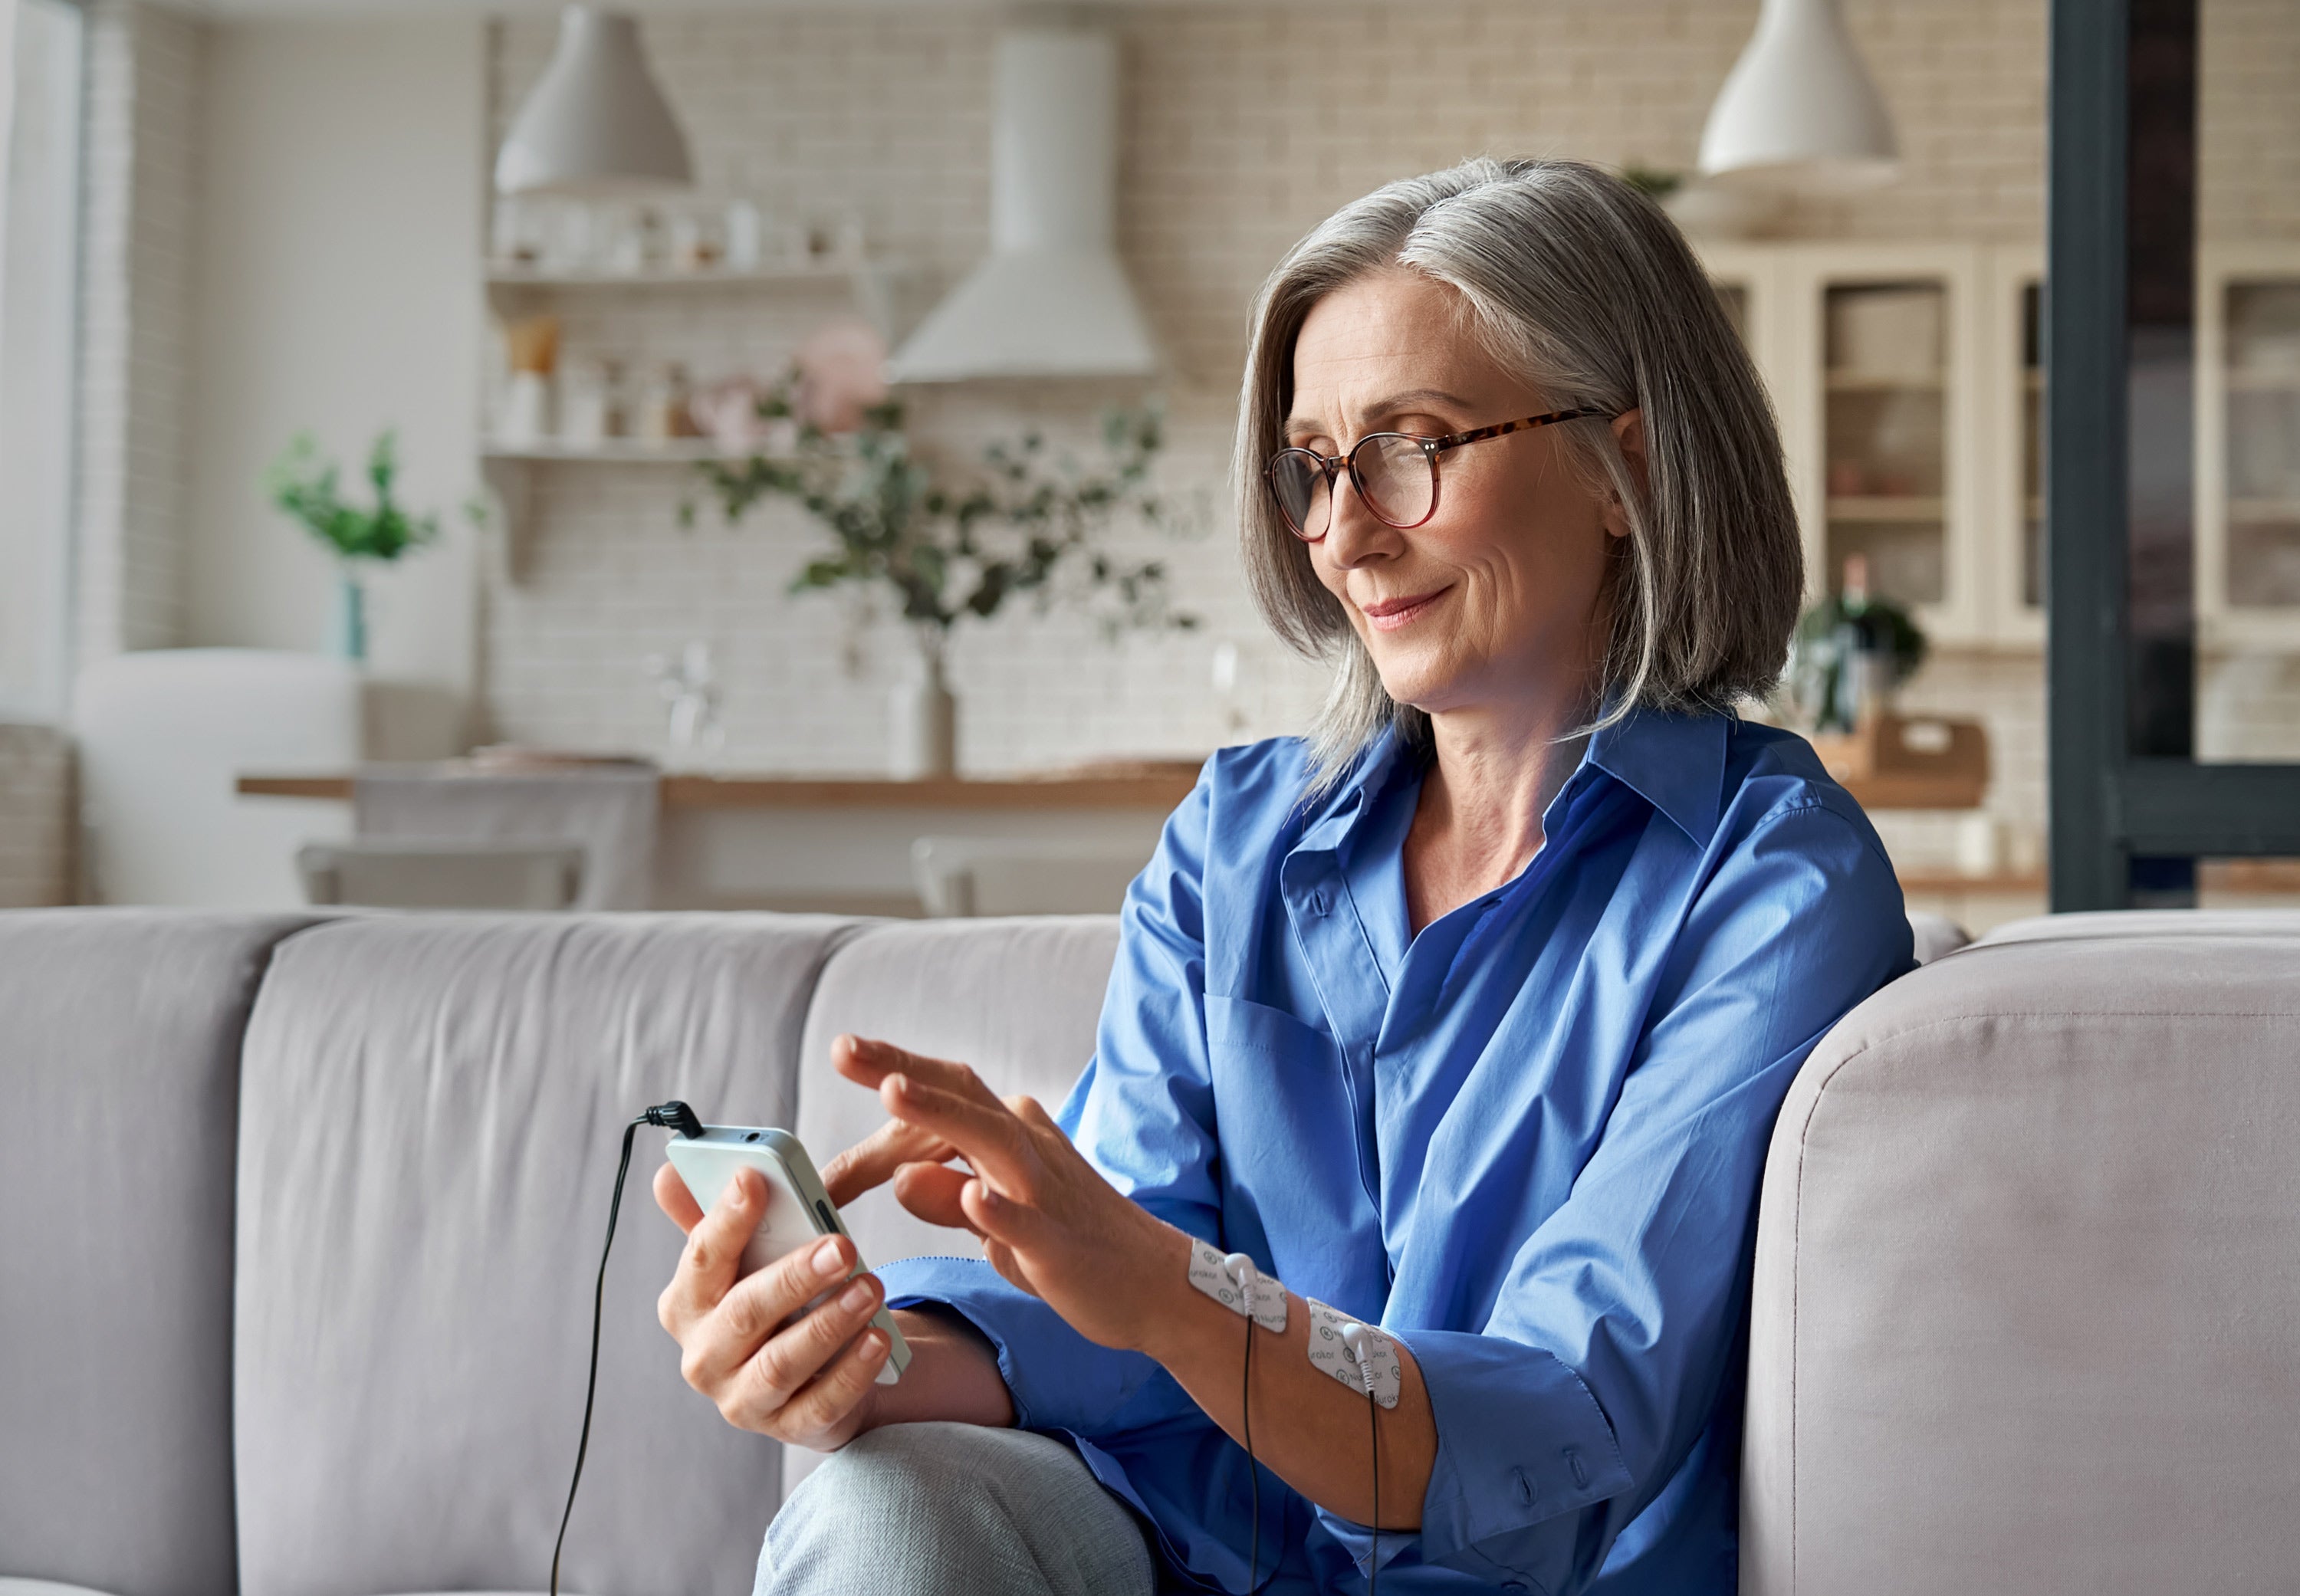 Middle aged lady on couch using the mitouch device with electrode pads on her forearm, smiling, managing pain, pain management